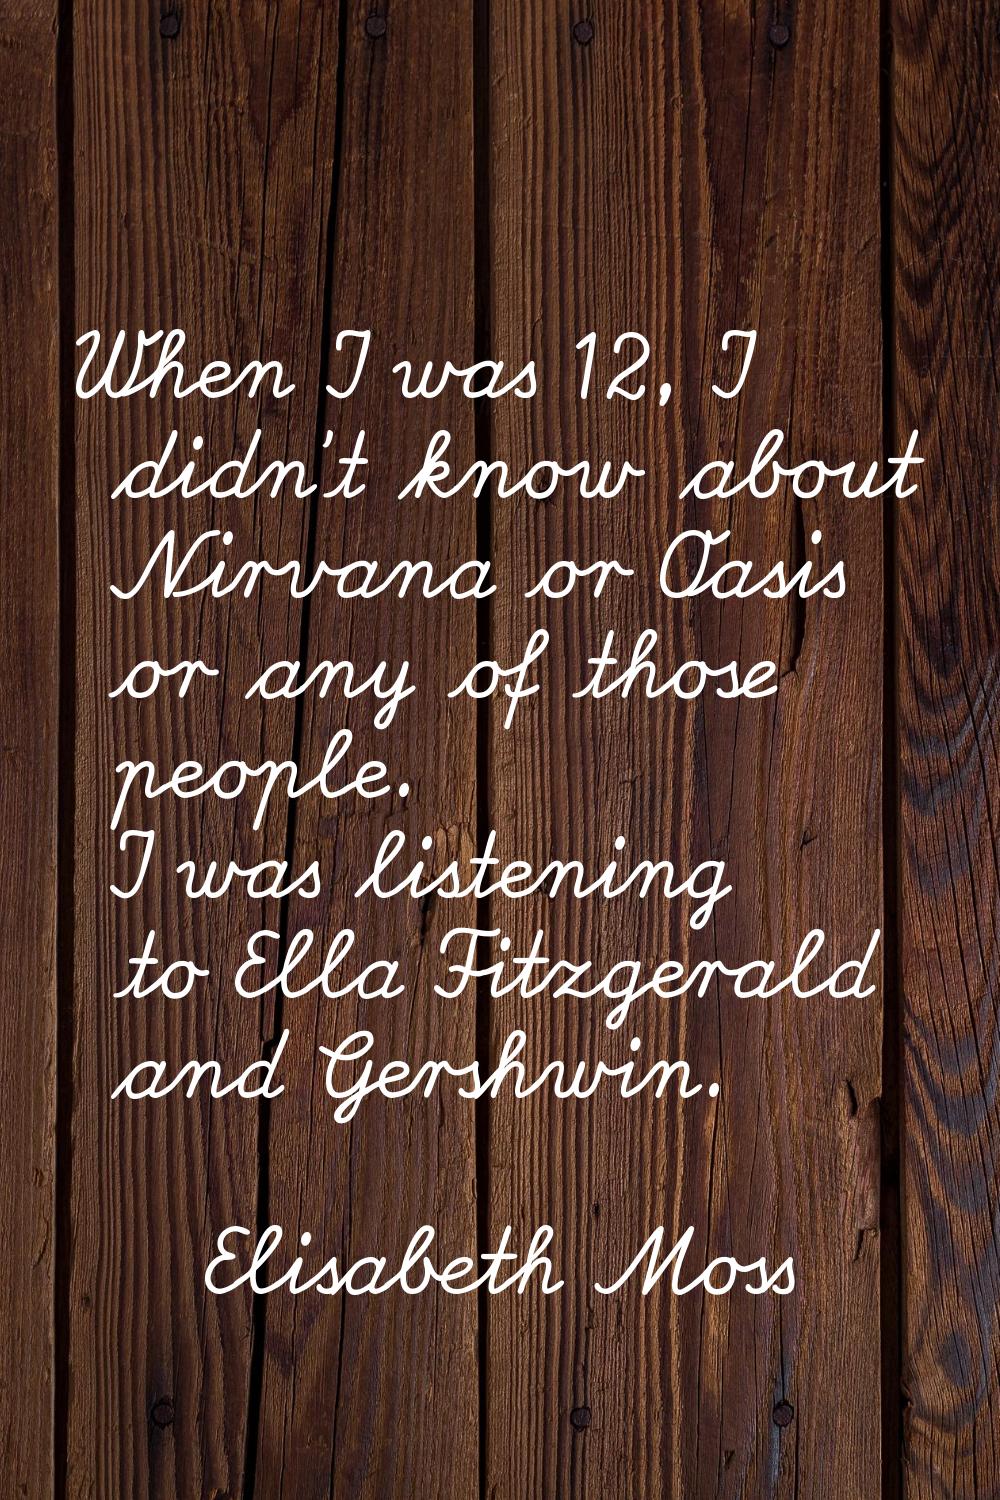 When I was 12, I didn't know about Nirvana or Oasis or any of those people. I was listening to Ella